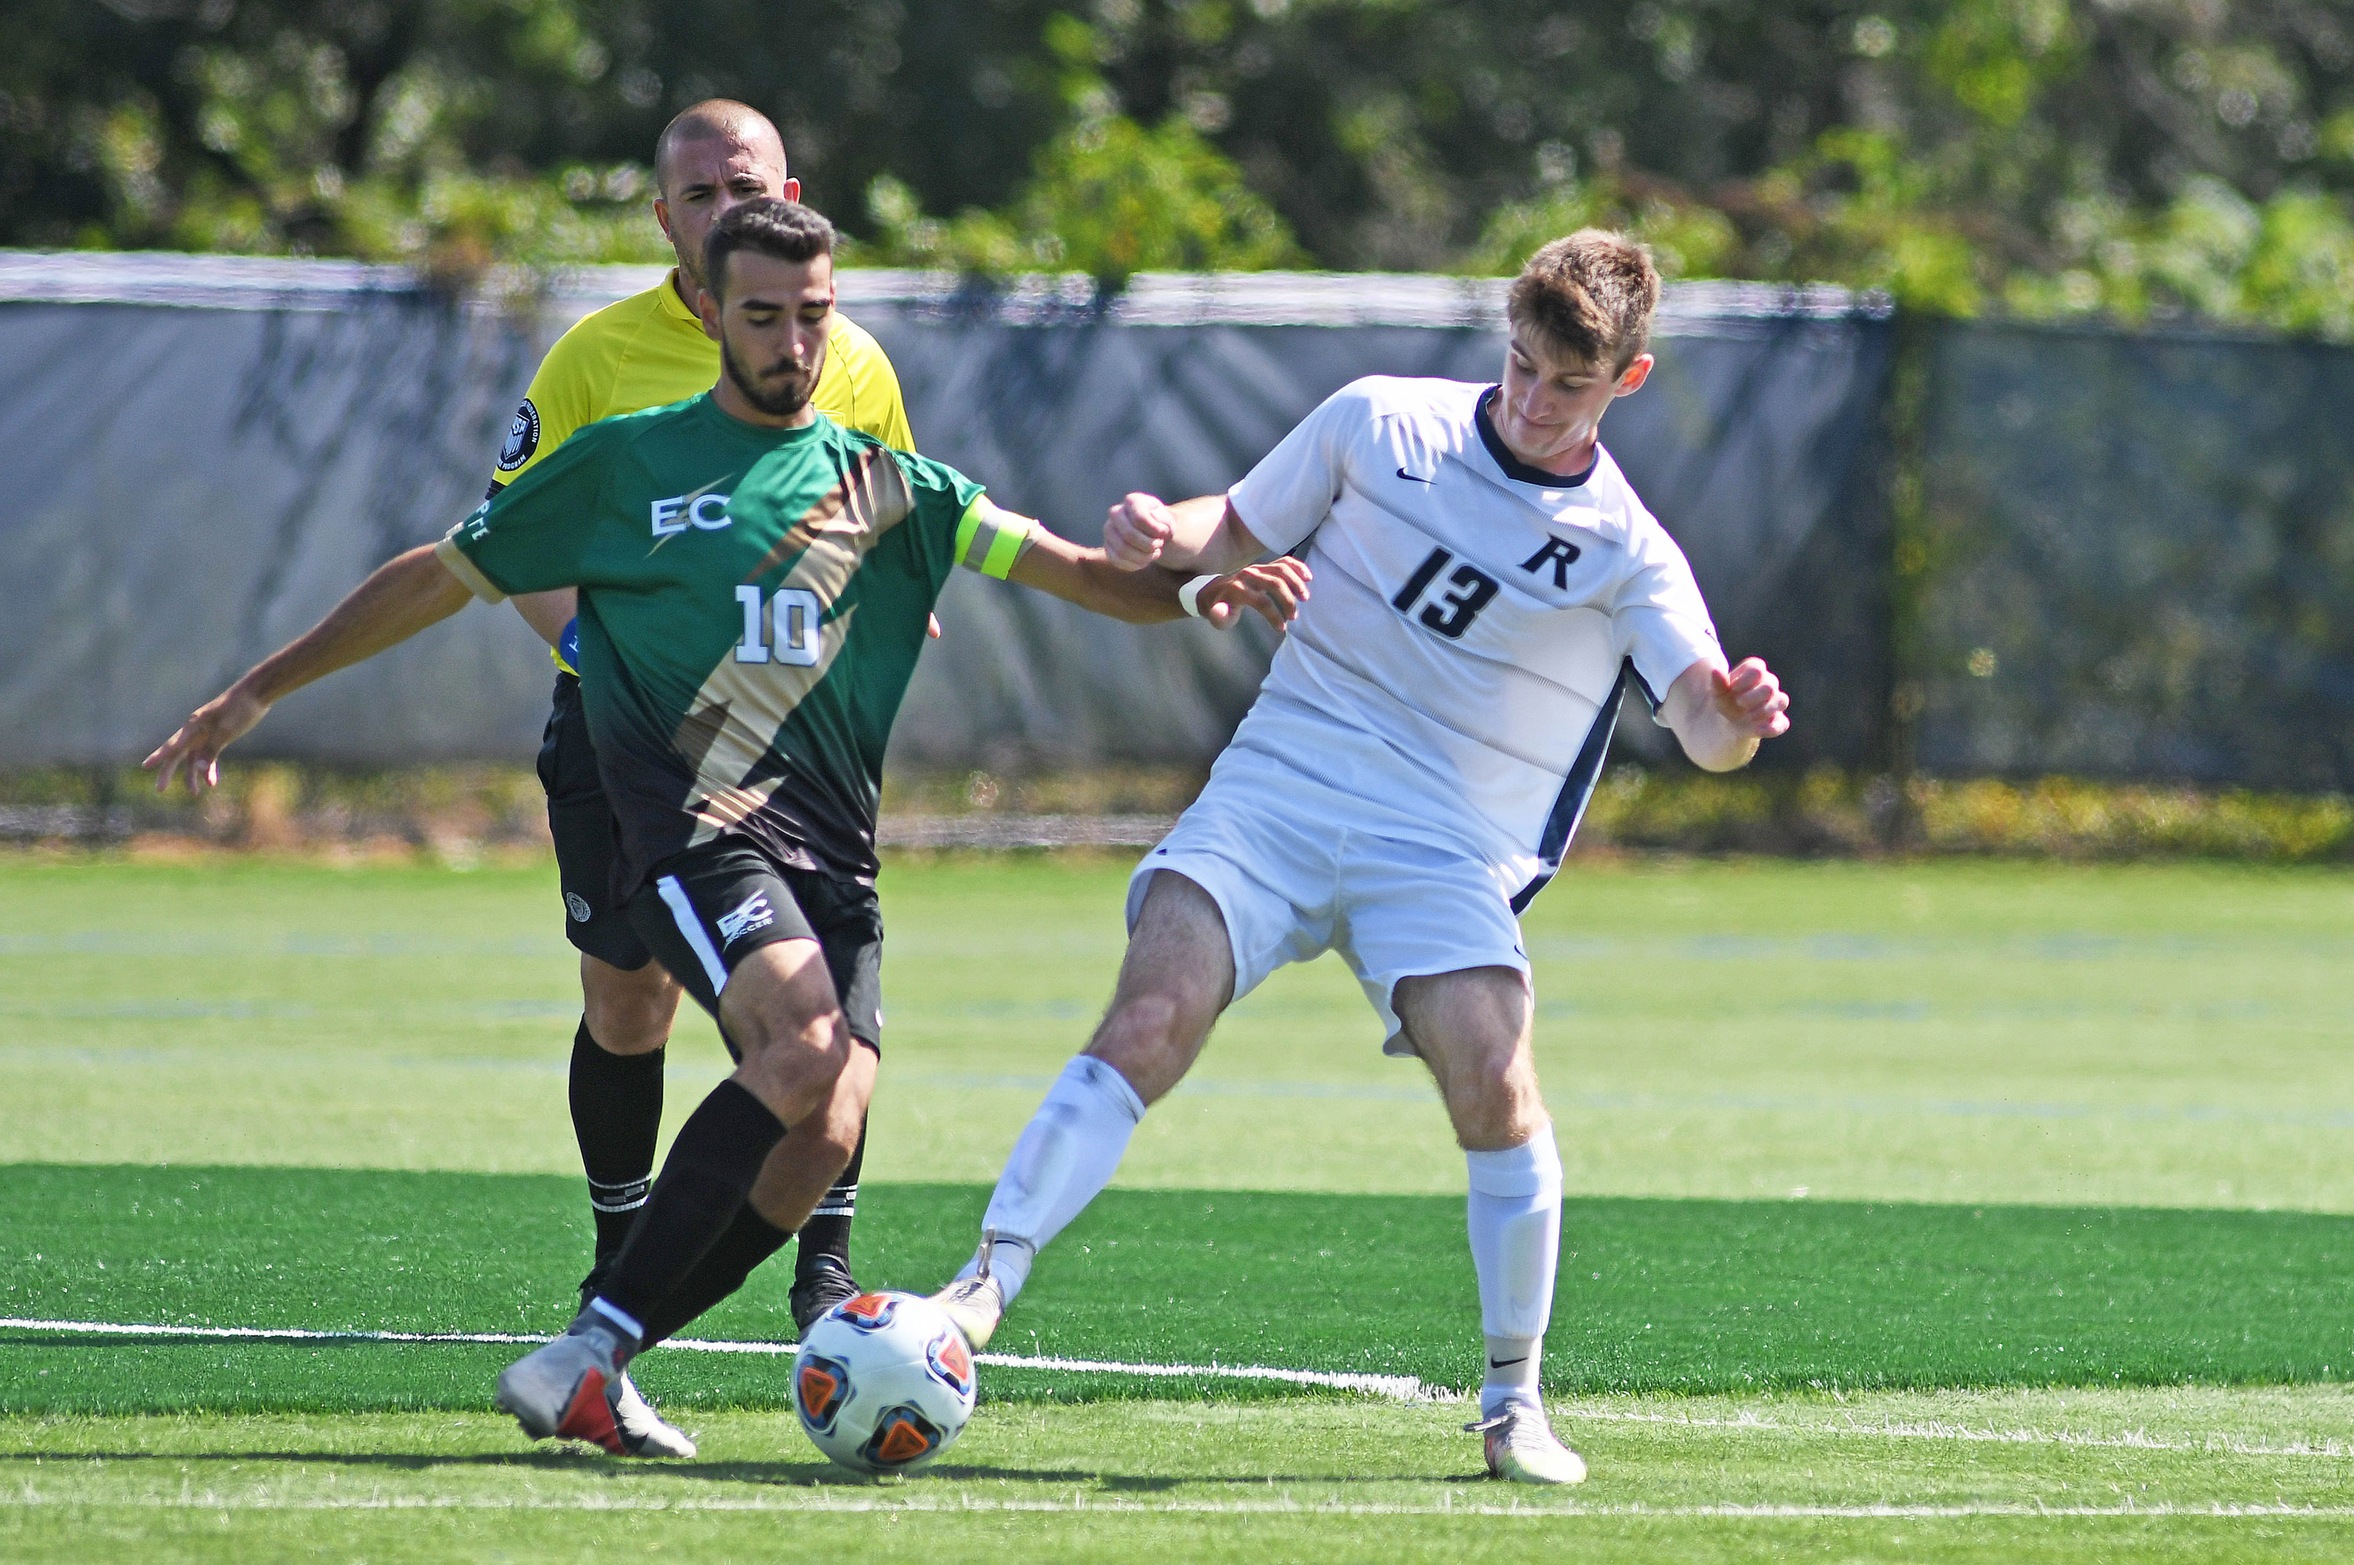 Second Half Surge by Chargers Downs Men's Soccer